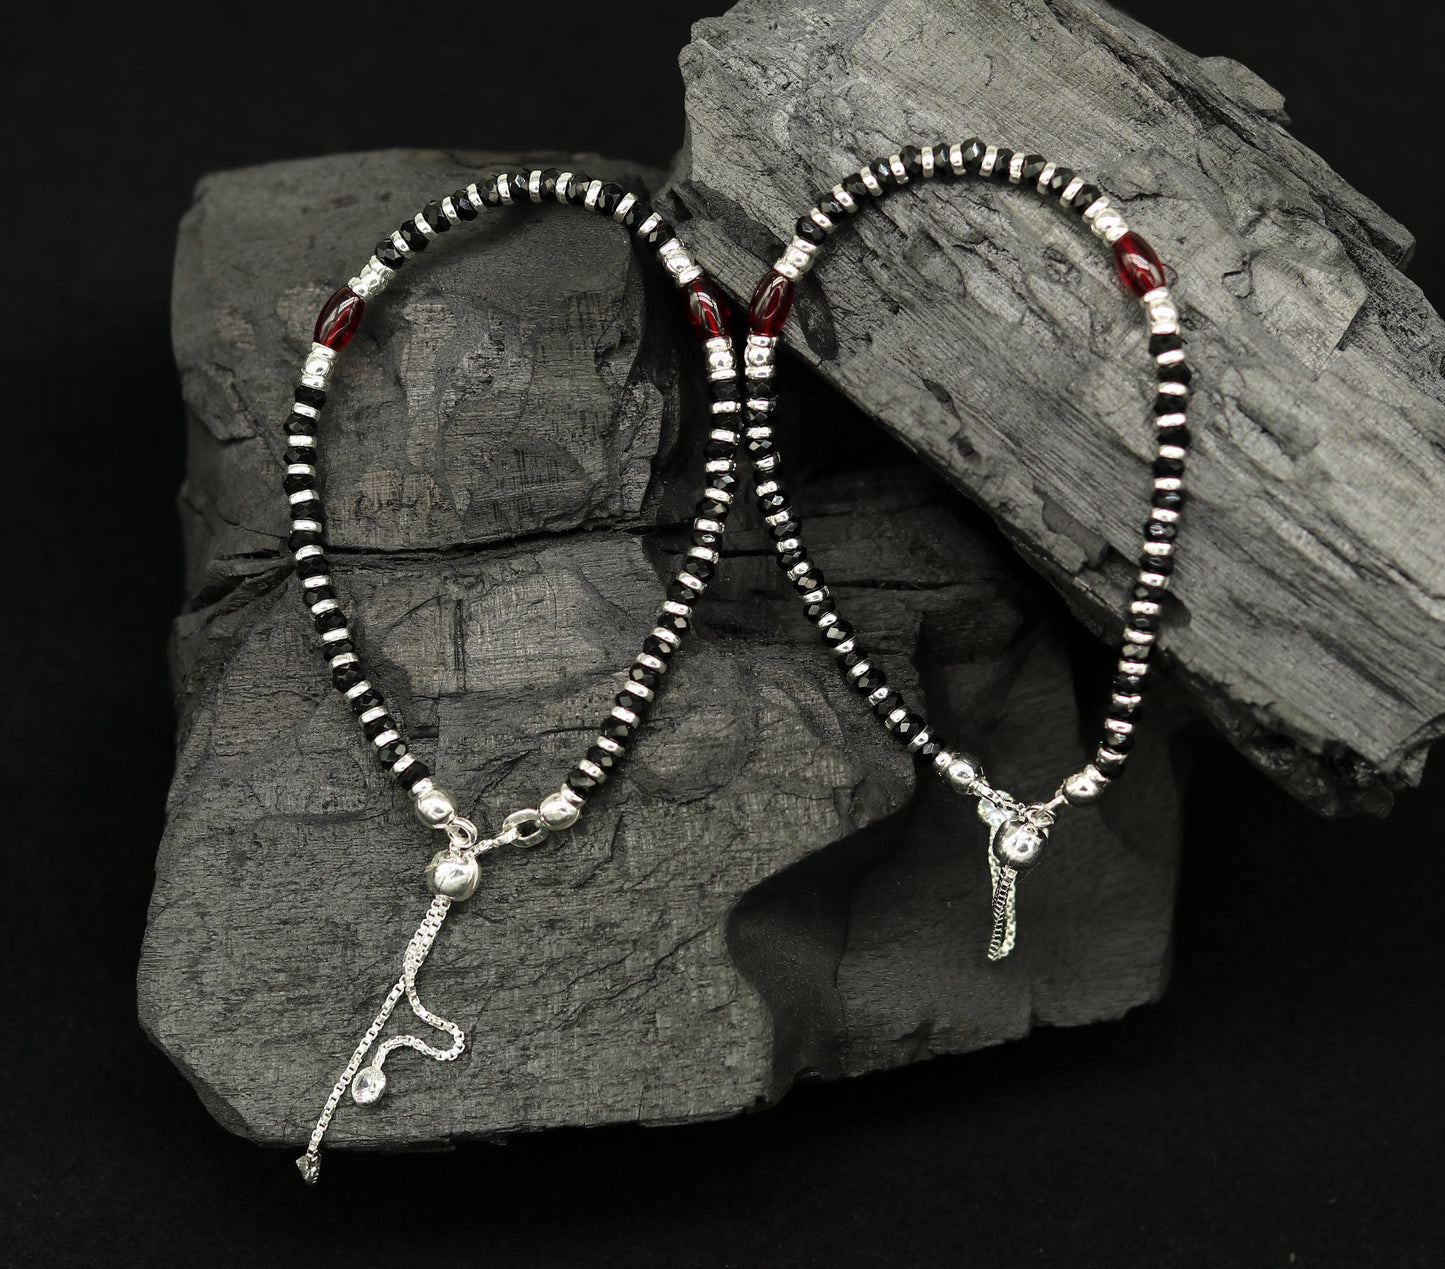 7 inches long handmade 925 sterling silver fabulous silver beads, black stone adjustable customized charm bracelet for girl's gifting sbr173 - TRIBAL ORNAMENTS